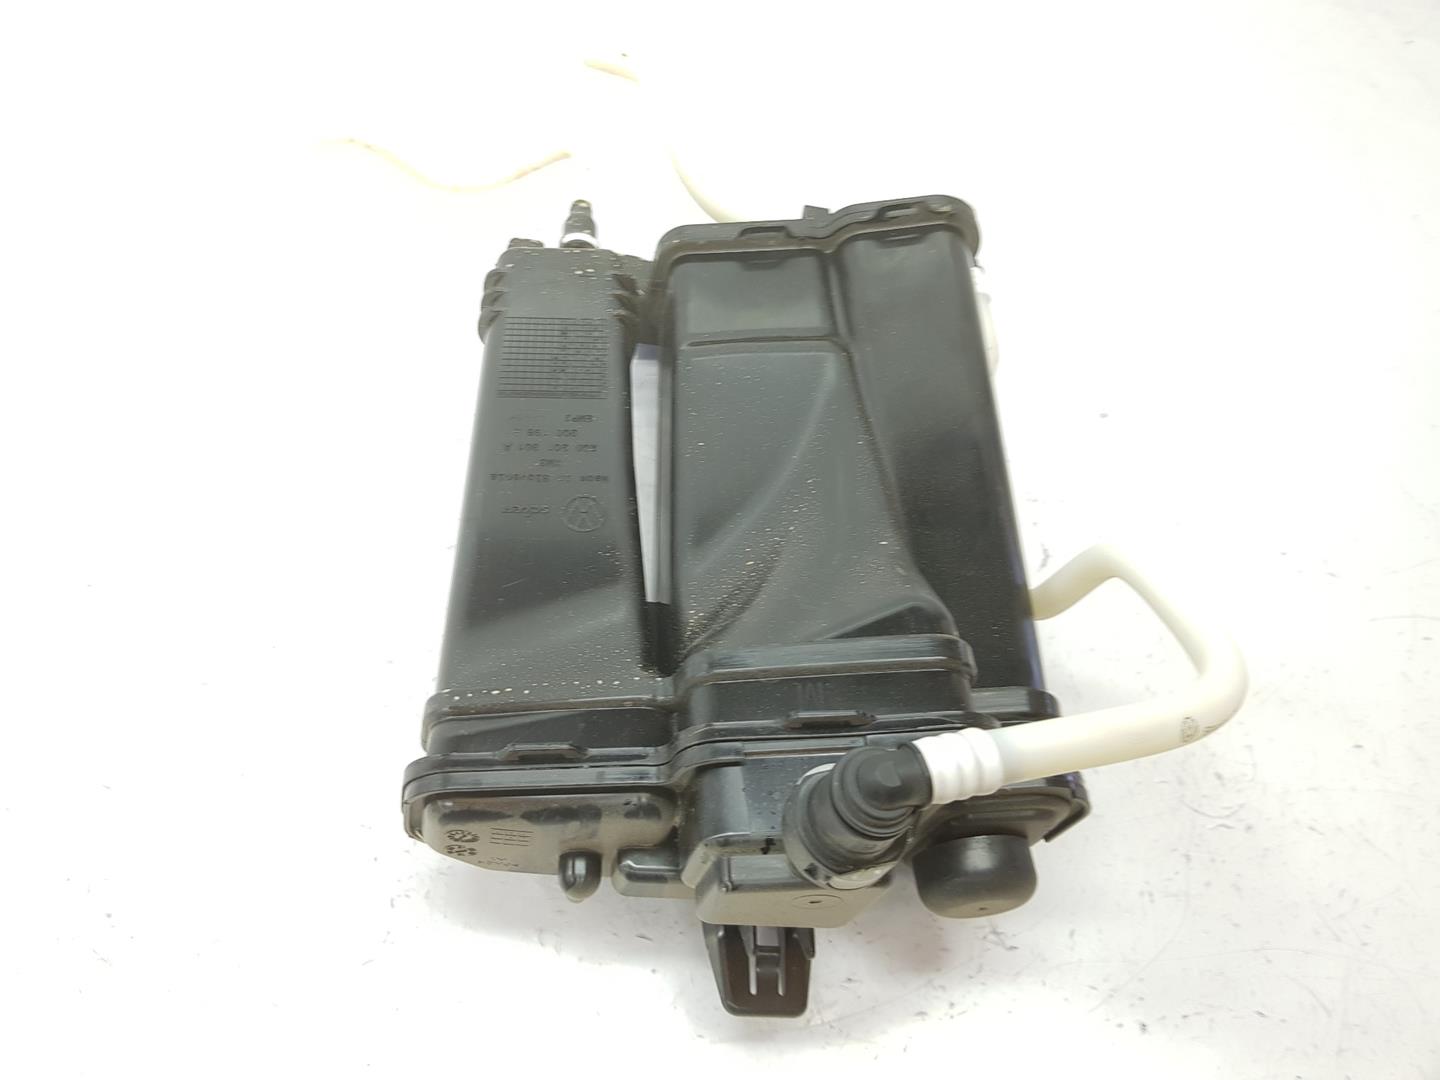 SEAT Alhambra 2 generation (2010-2021) Other Engine Compartment Parts 2Q0201801A, 2Q0201801A 19938391